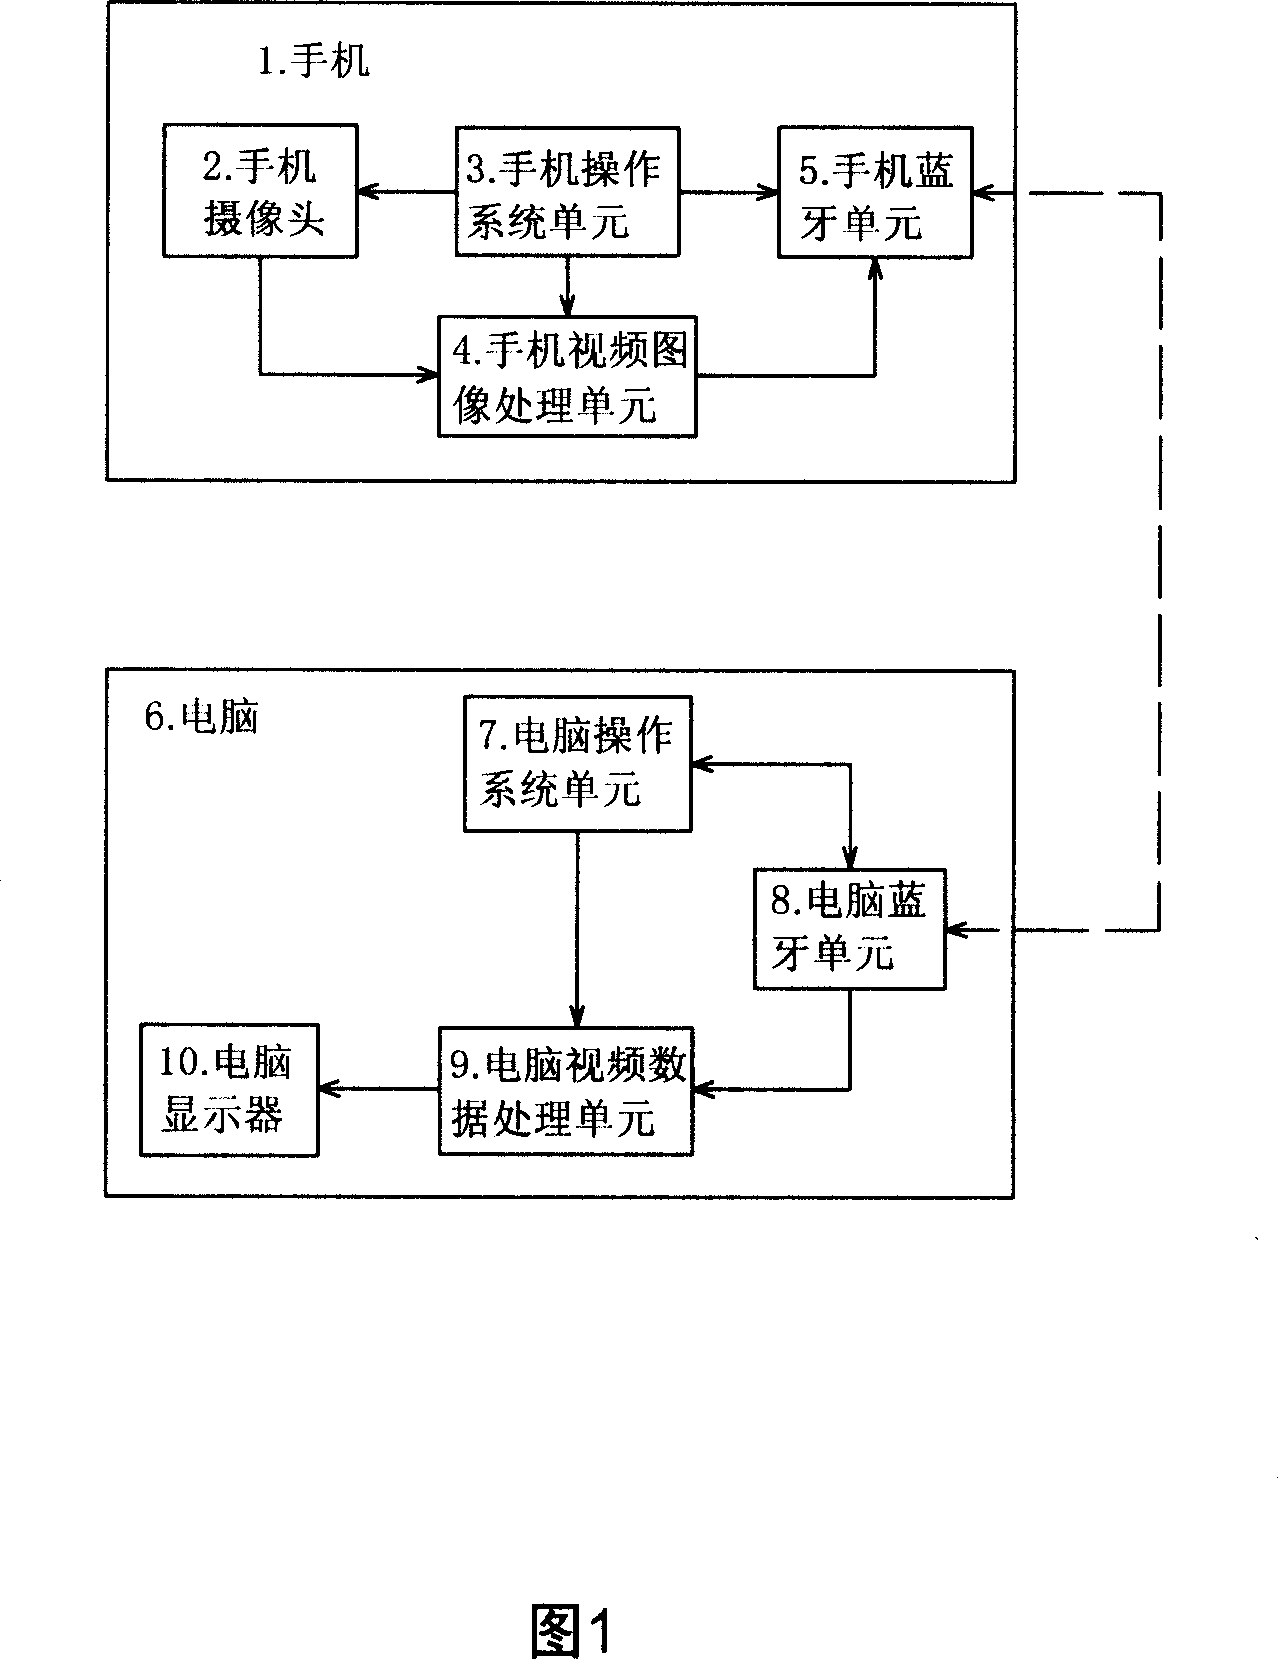 Method for cellphone transmitting video image to computer with bluetooth